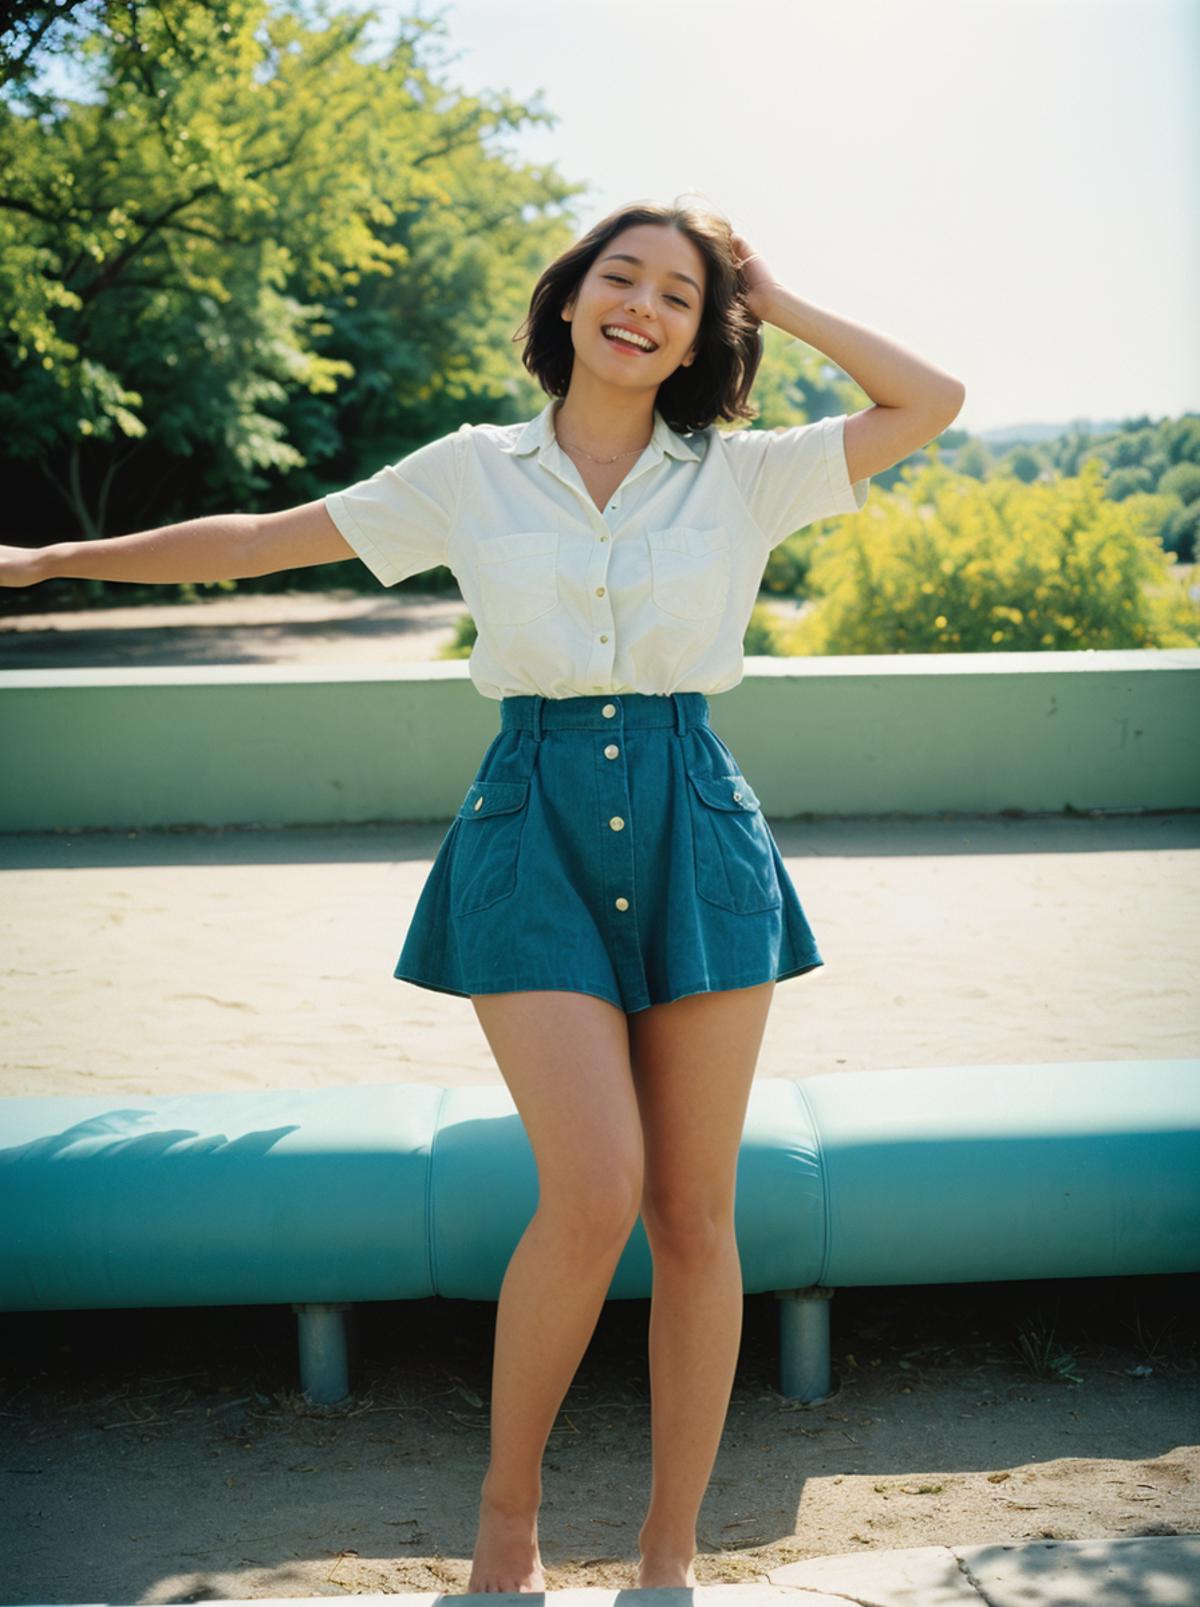 A smiling woman wearing a white shirt and blue shorts poses on a blue bench.